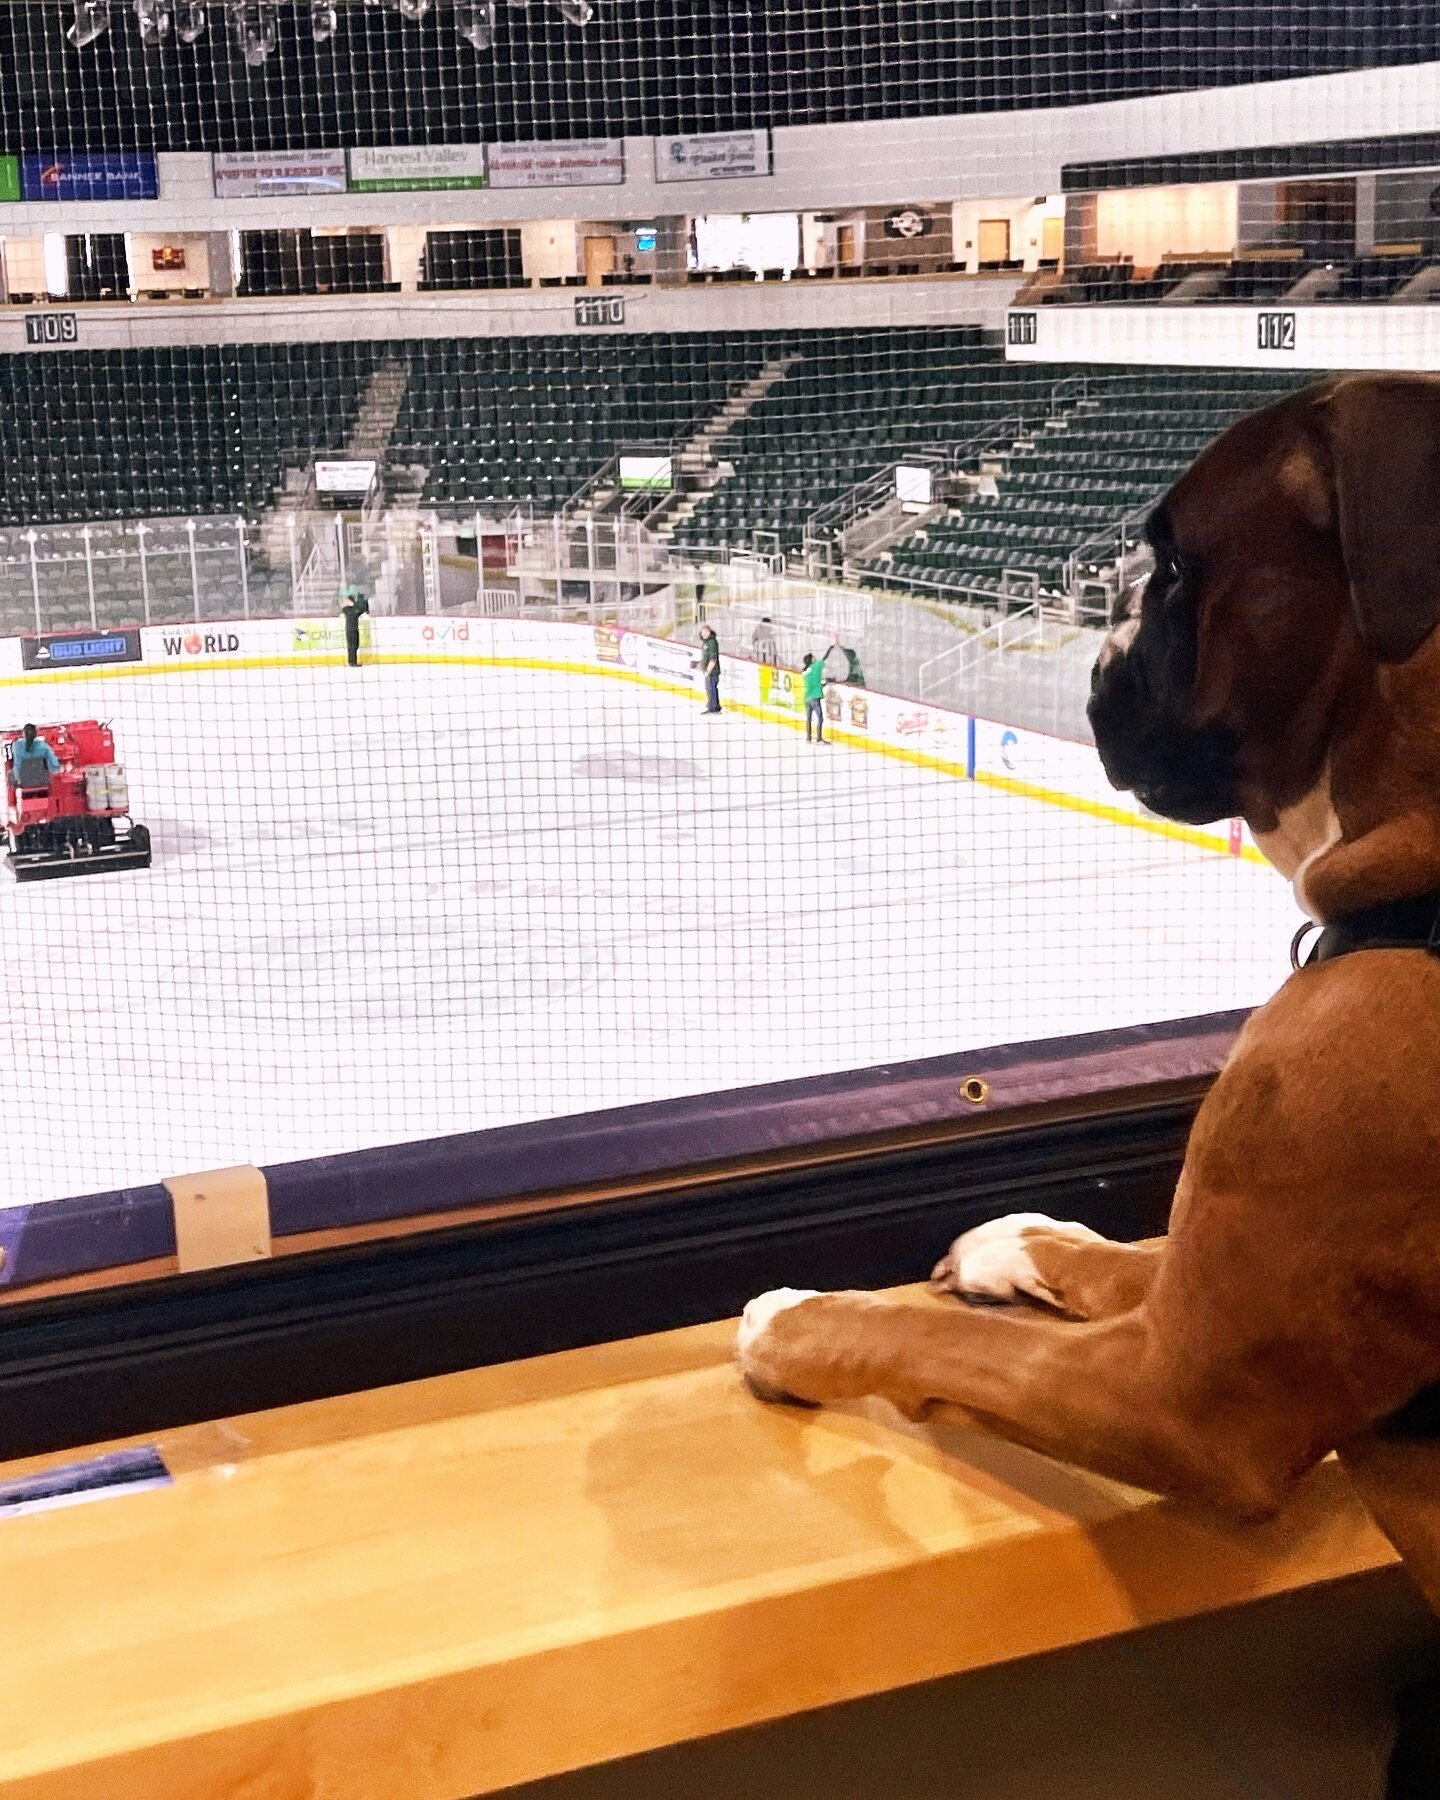 Banksy has been supervising to make sure we are ready for all the pups coming for Walts's birthday!! Who are you bringing?! Post your pooch below ⬇️

#wenatchee #towntoyotacenter #wholetthedogsout #wenatcheewild #hockey #whl #pucksnpaws